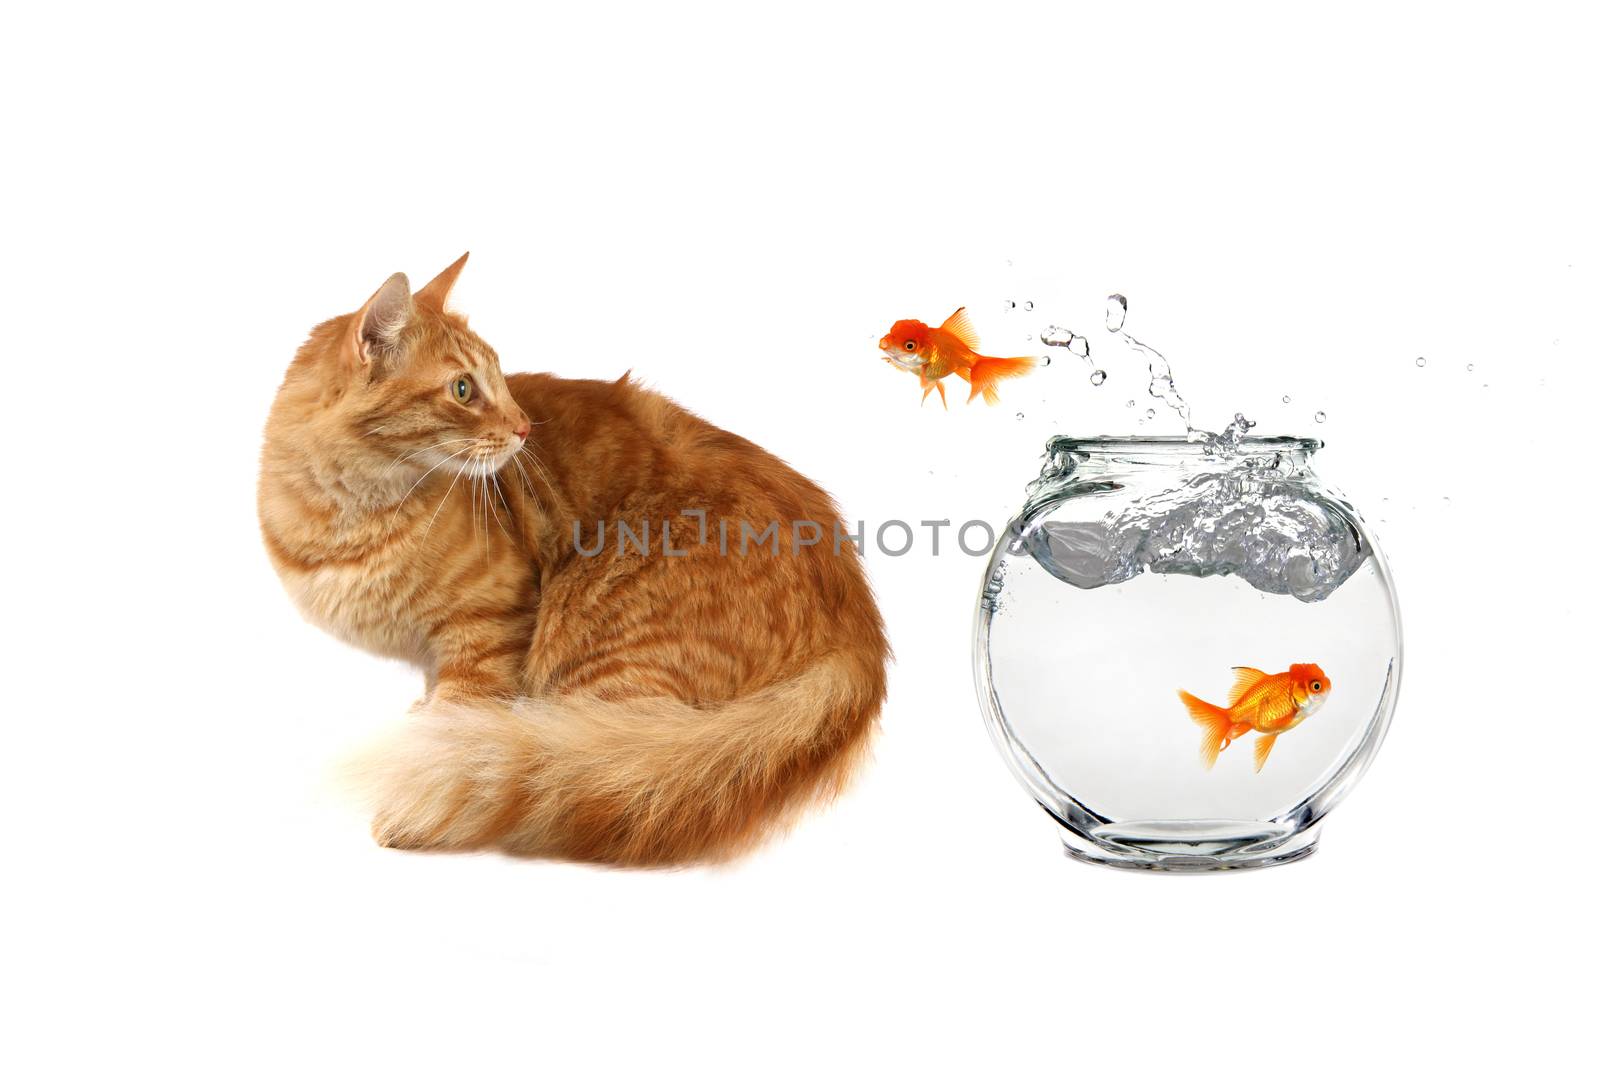 Cat Looking at a Gold Fish Jumping Out of Water on White Background